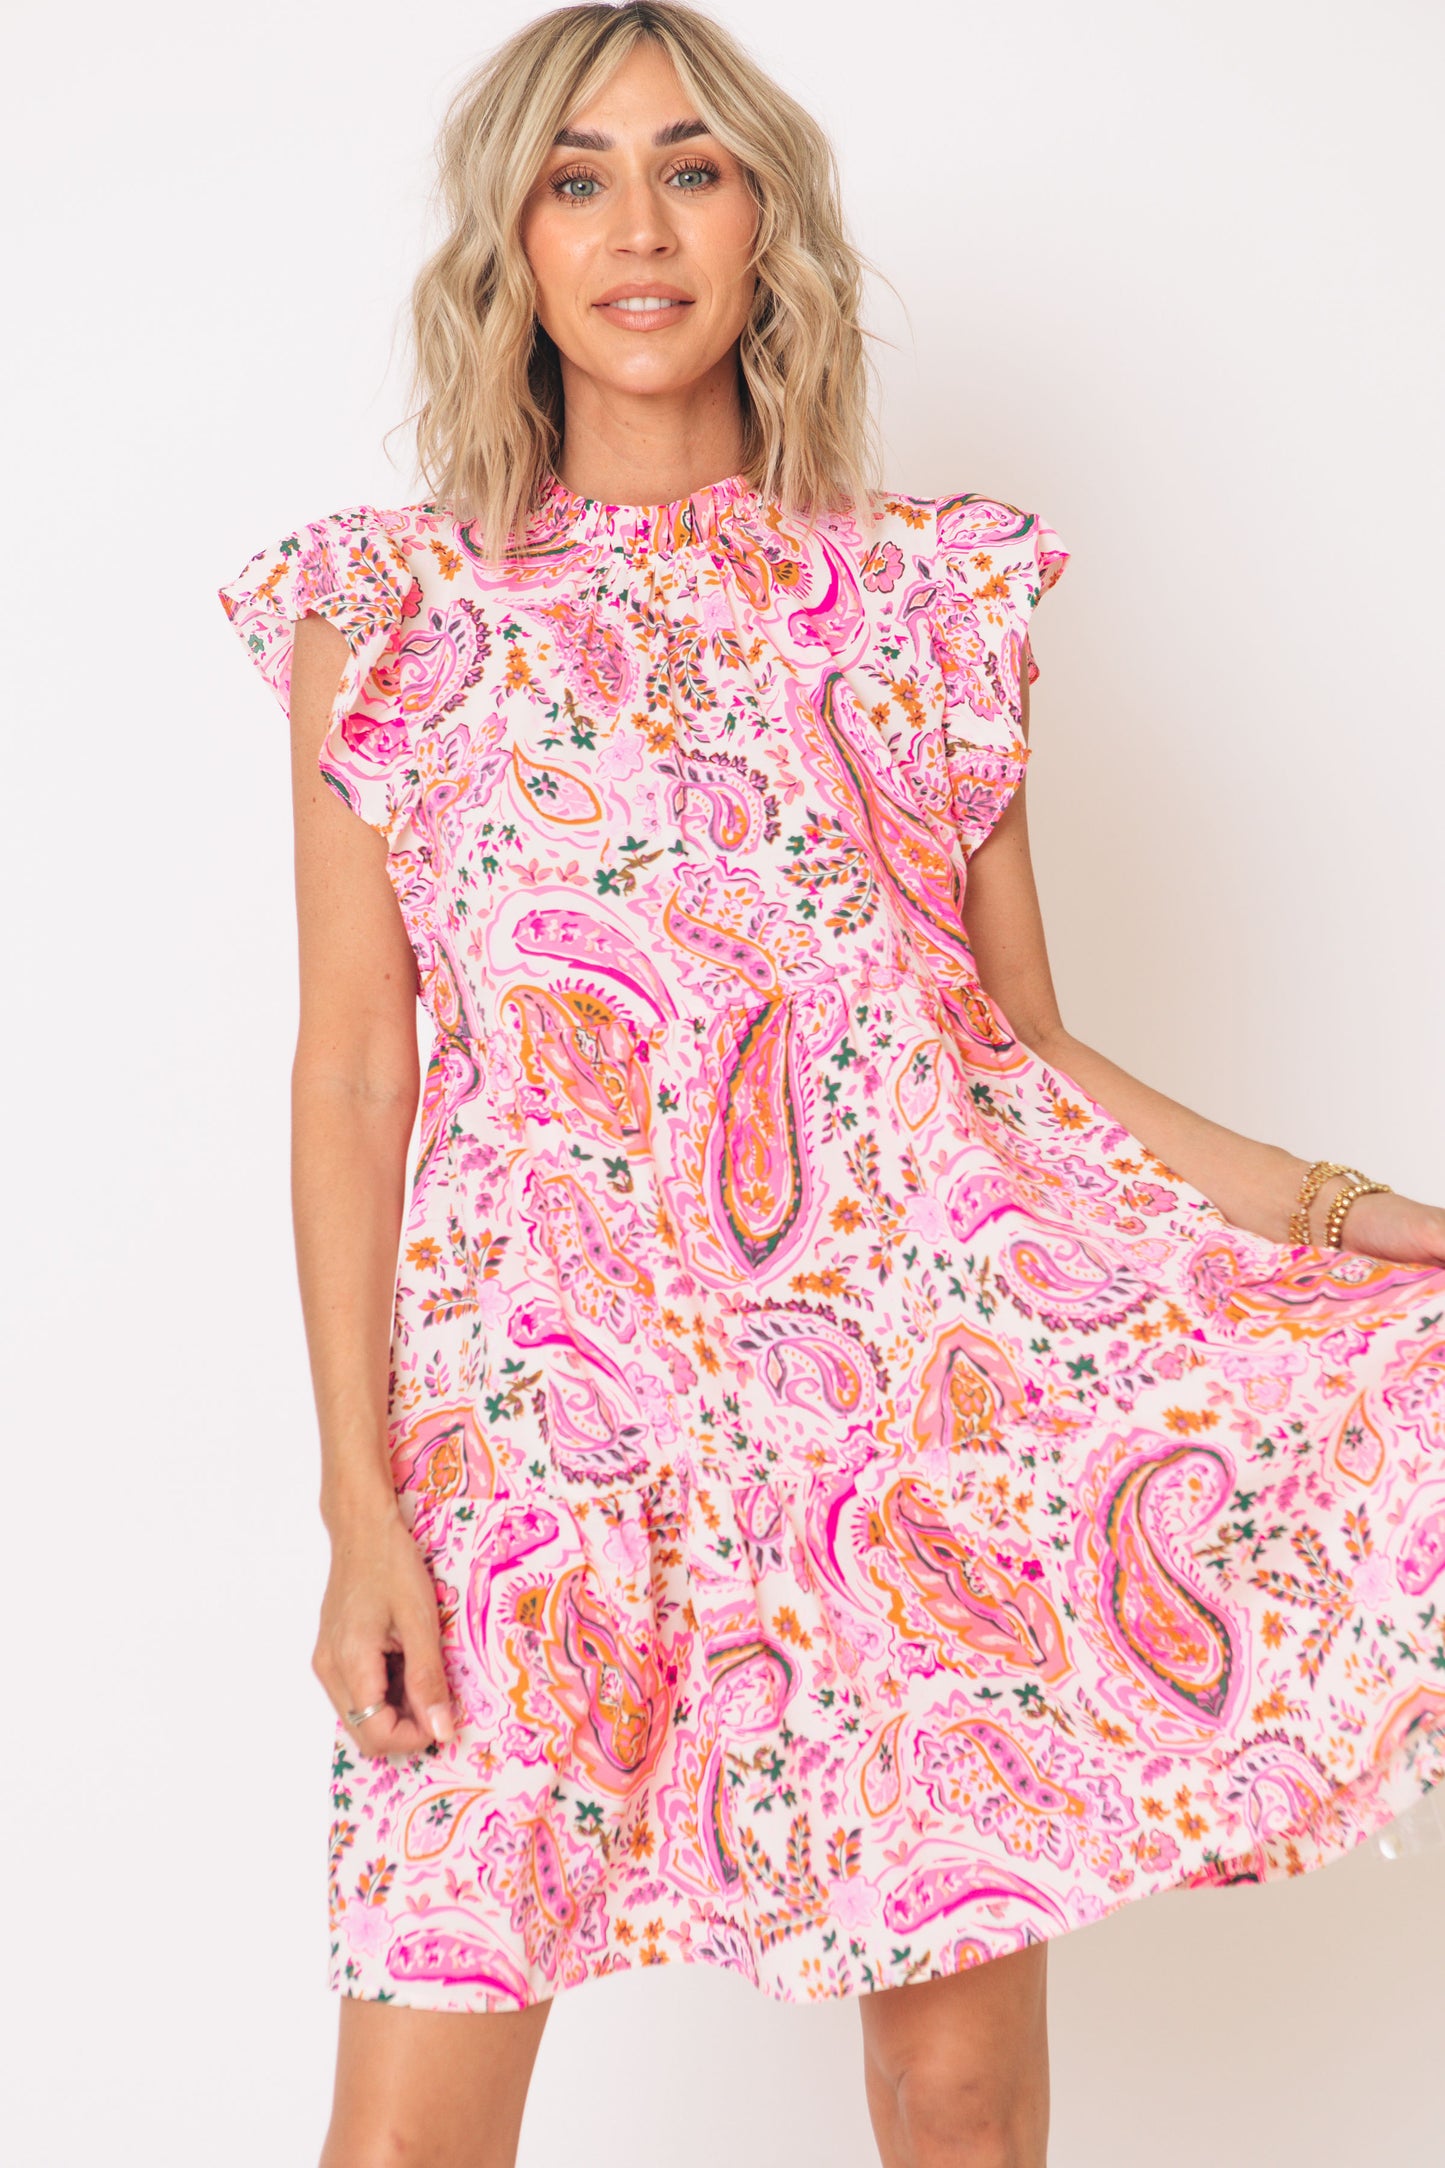 Paisley Patterned Baby Doll Dress (S-3XL)